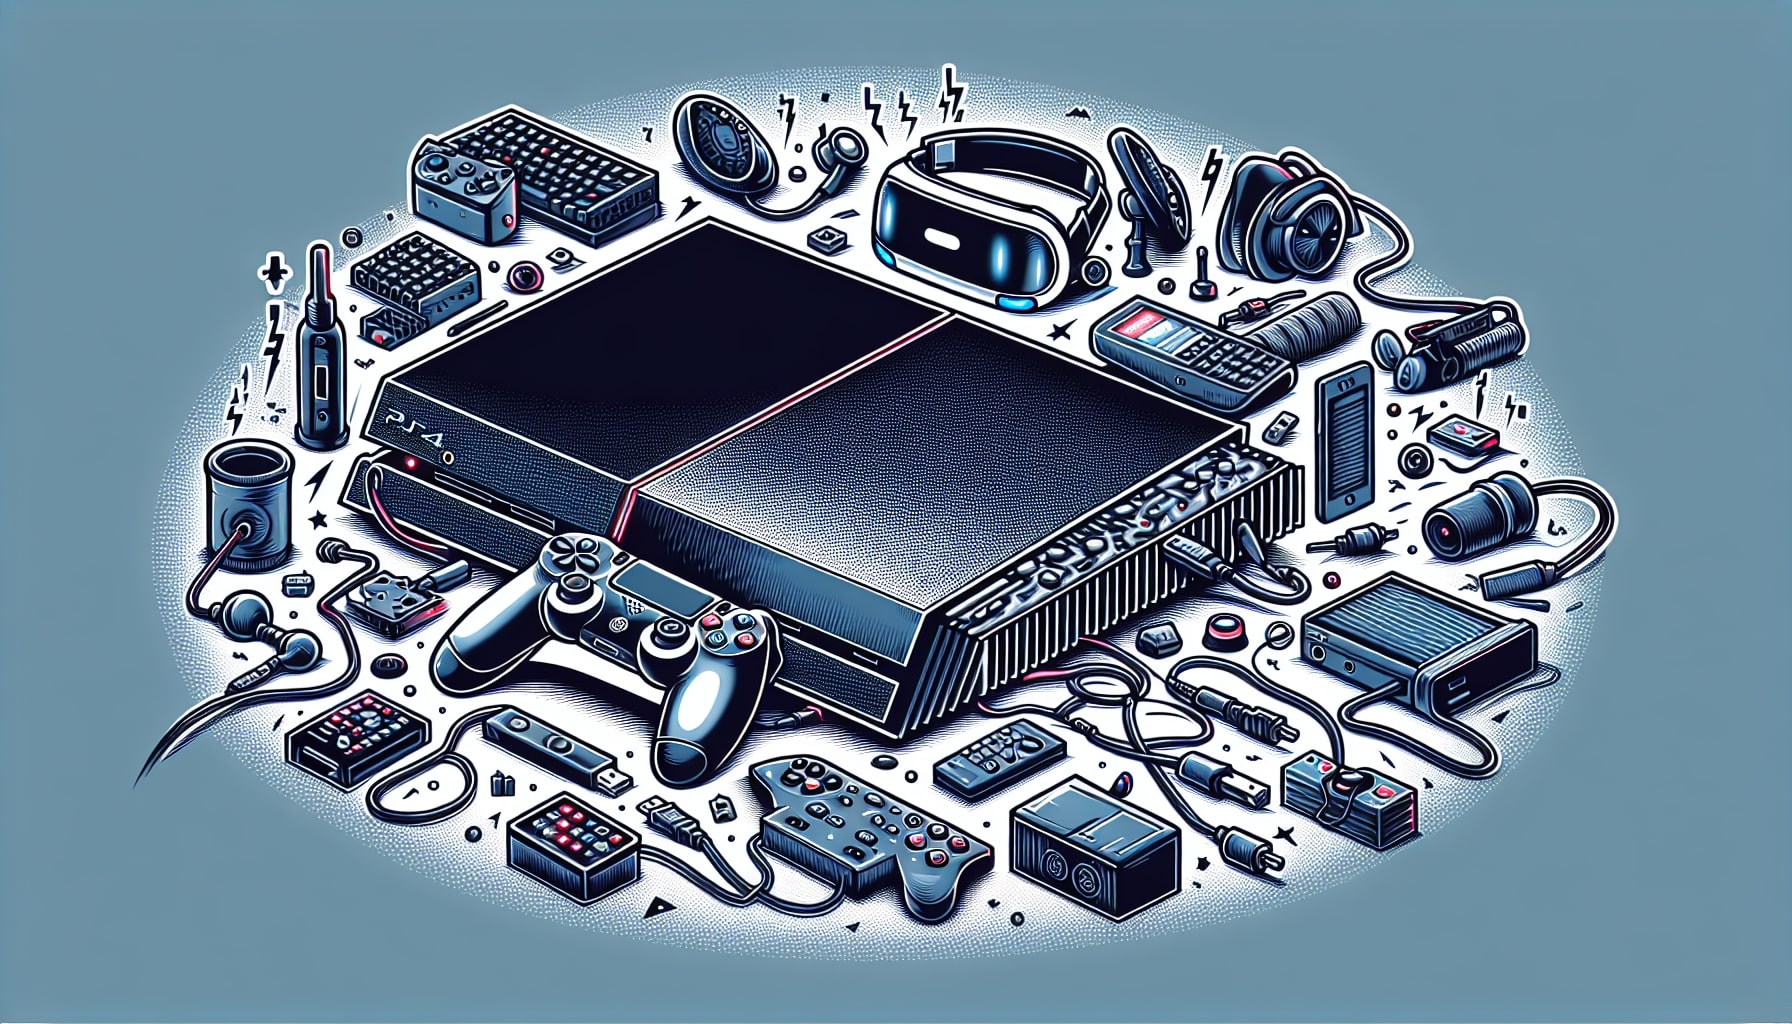 Assorted vintage electronics and gaming devices illustration.